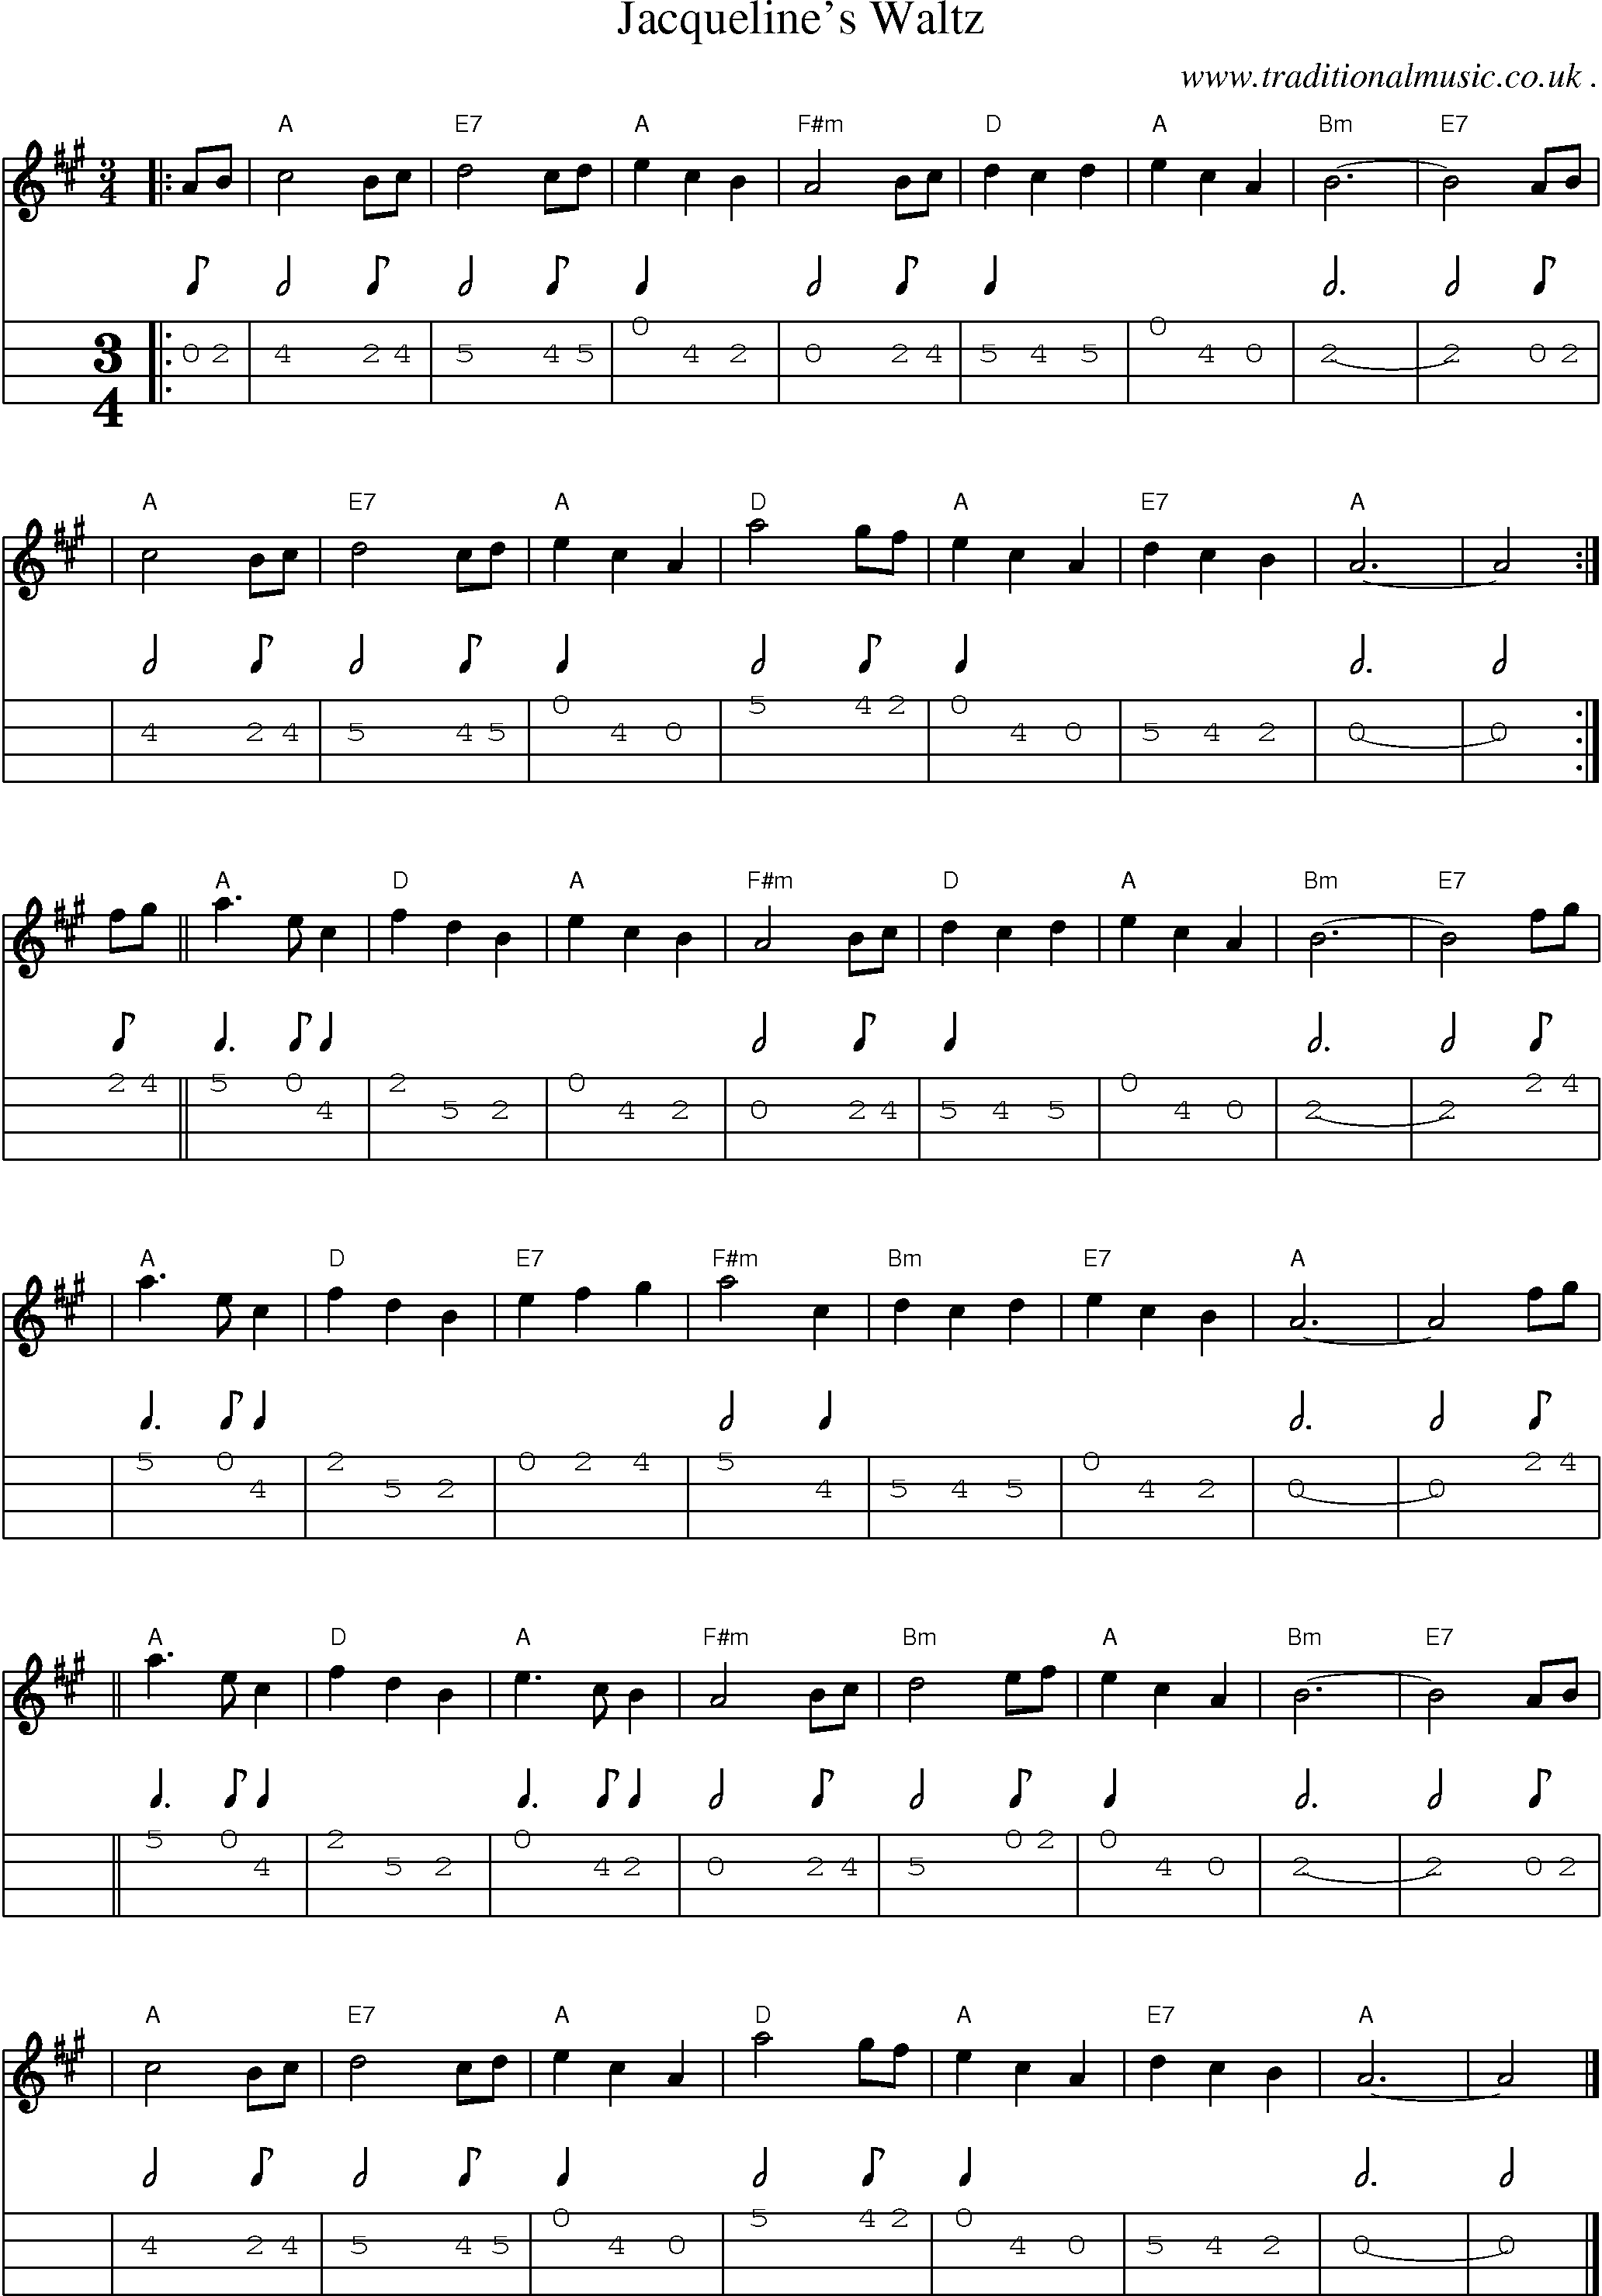 Sheet-music  score, Chords and Mandolin Tabs for Jacquelines Waltz